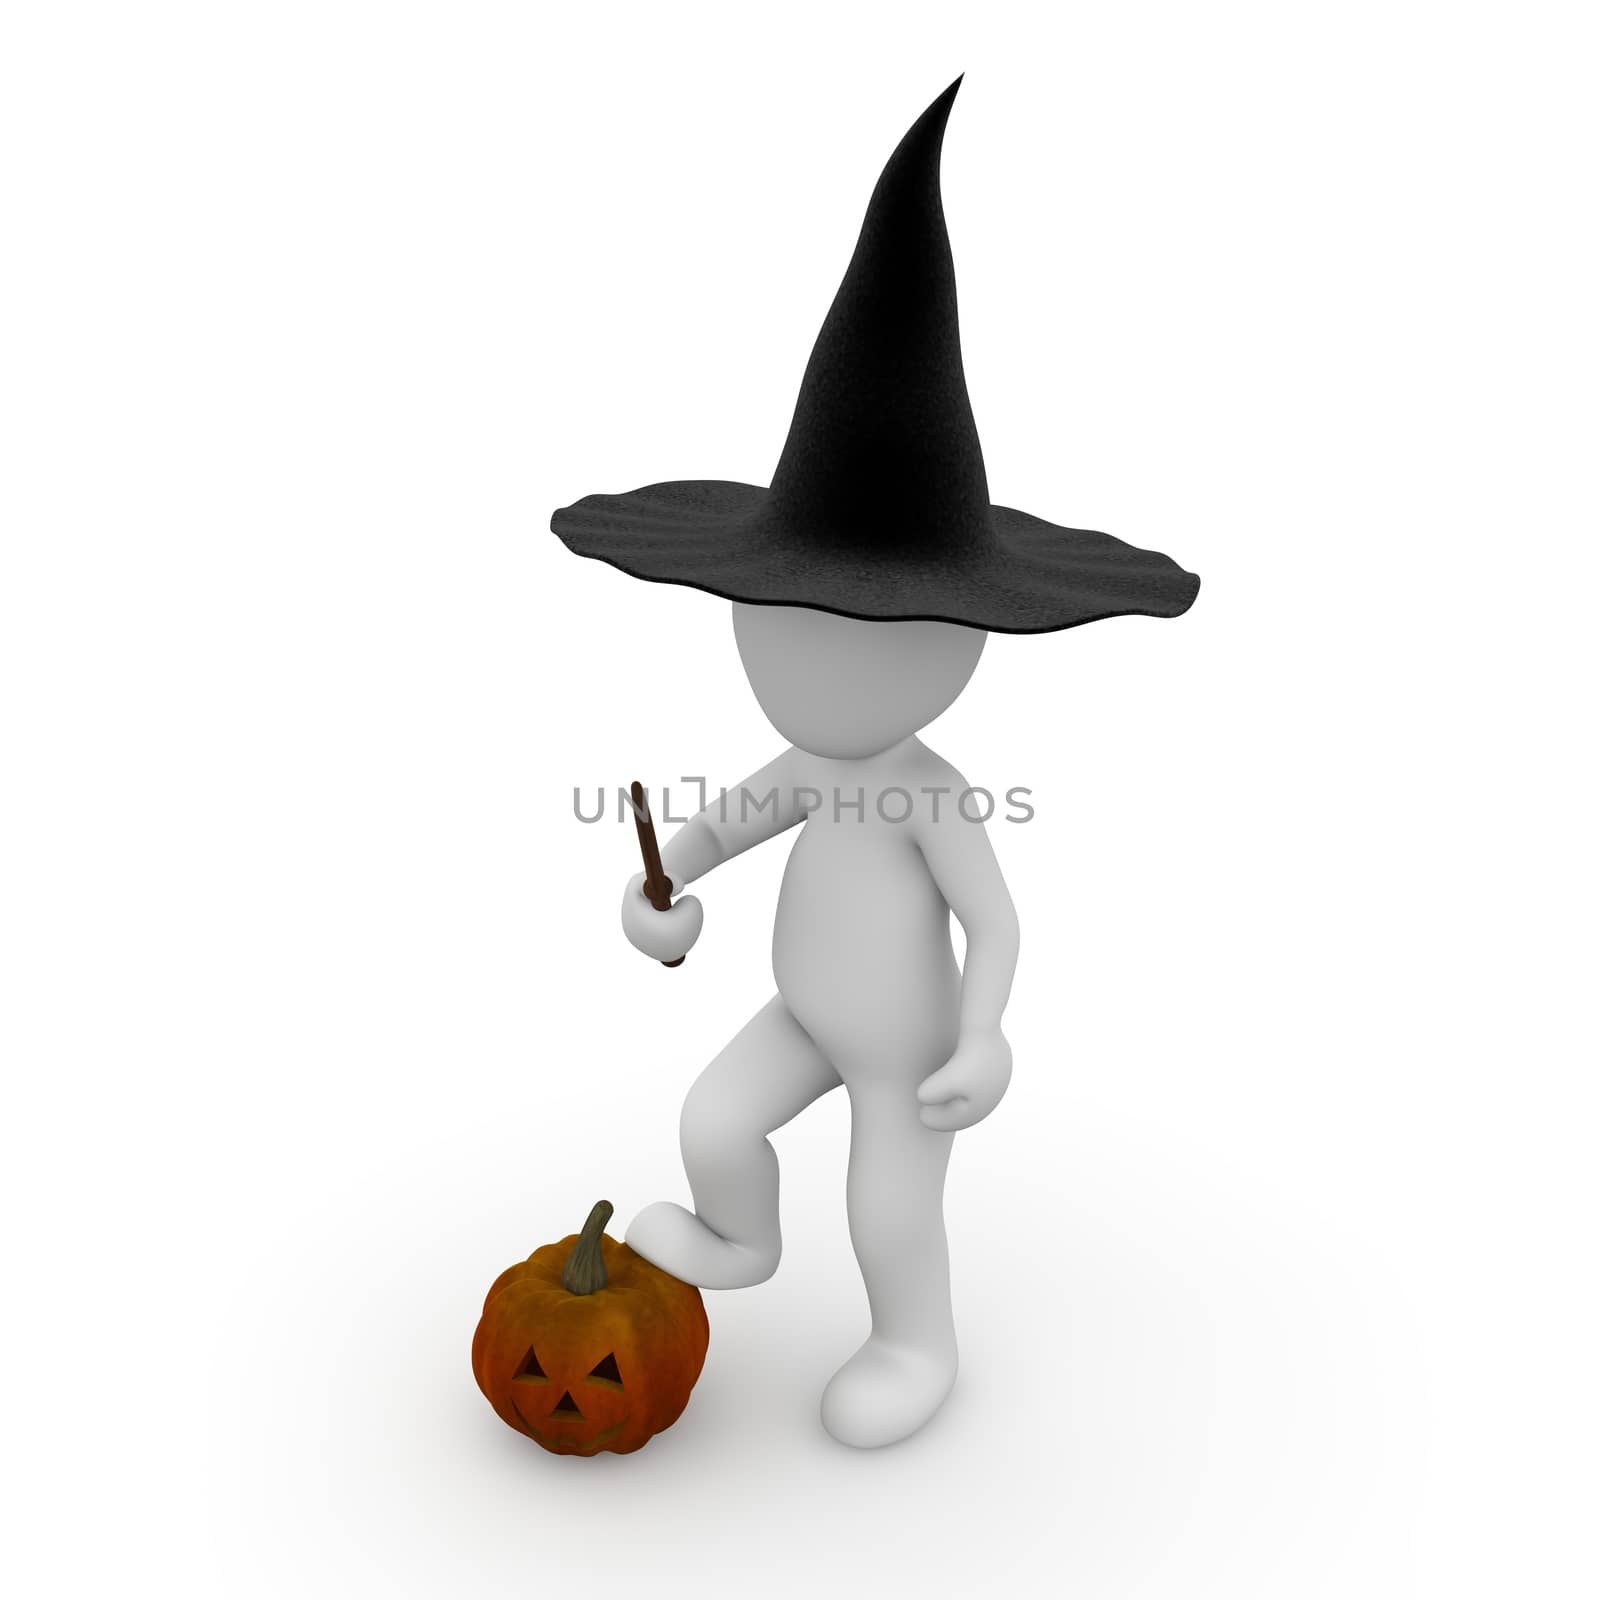 A witch with a magic wand and a pumpkin.